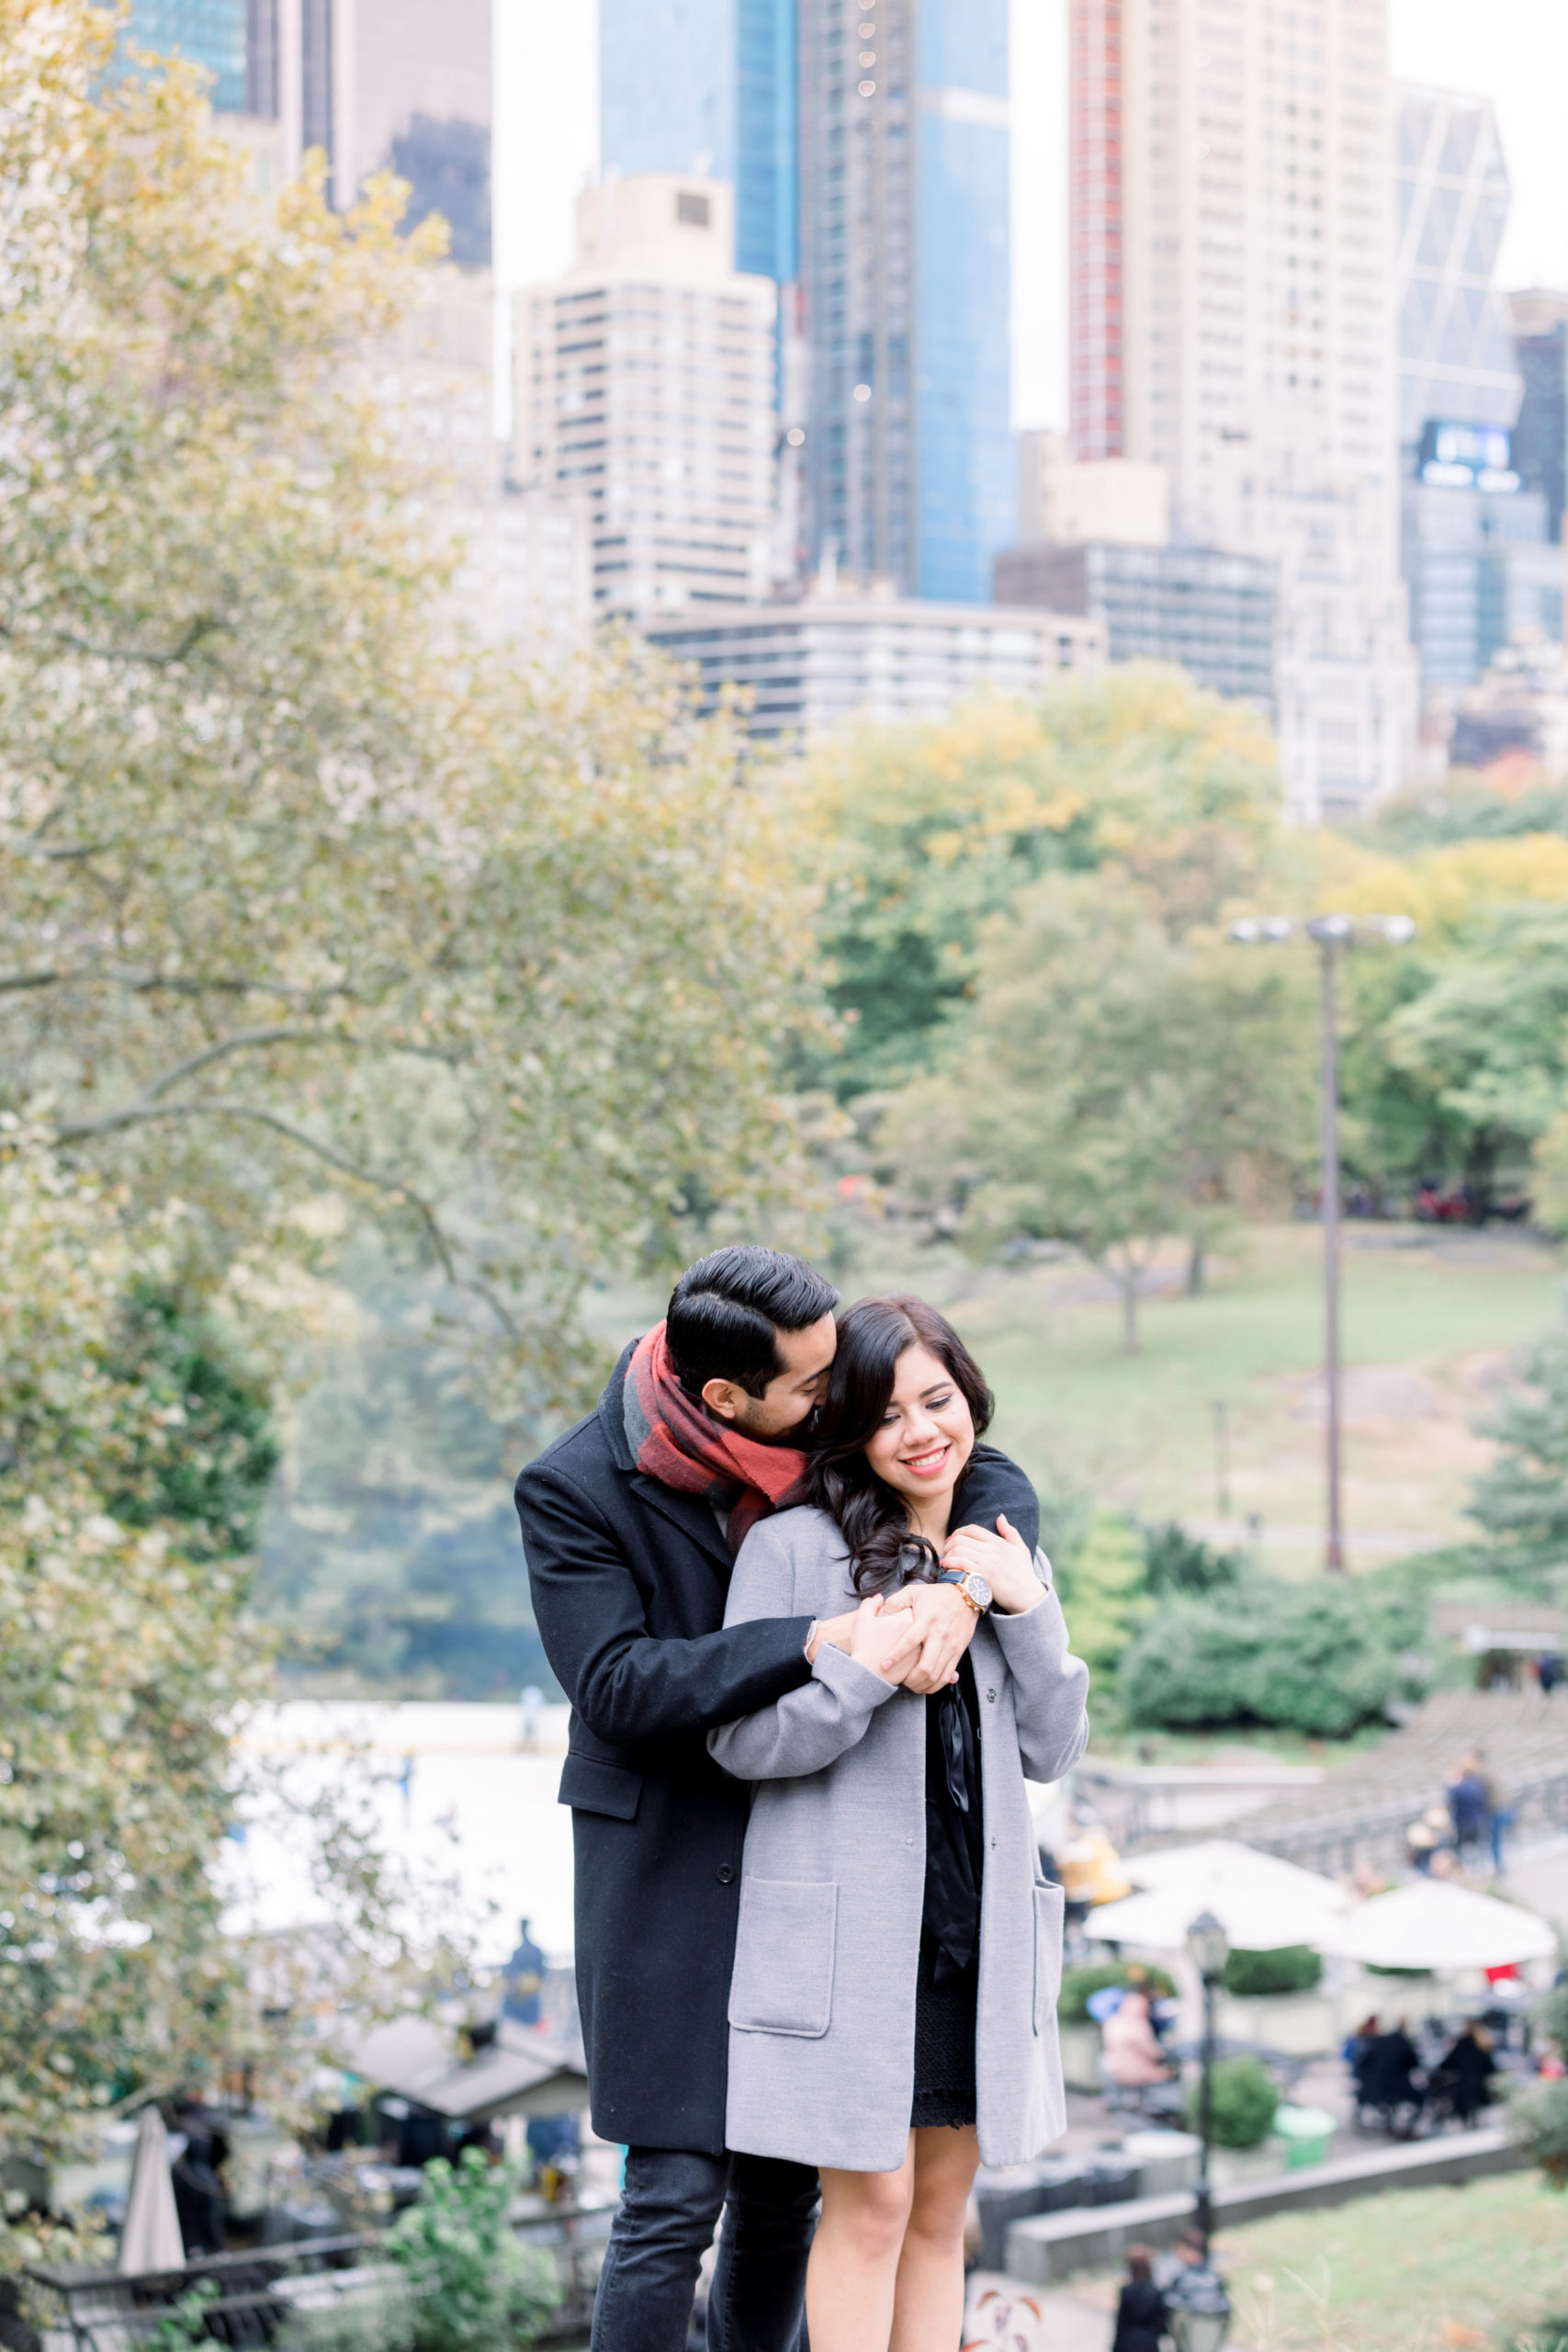 View More: https://andibravophotography.pass.us/nyc-proposal